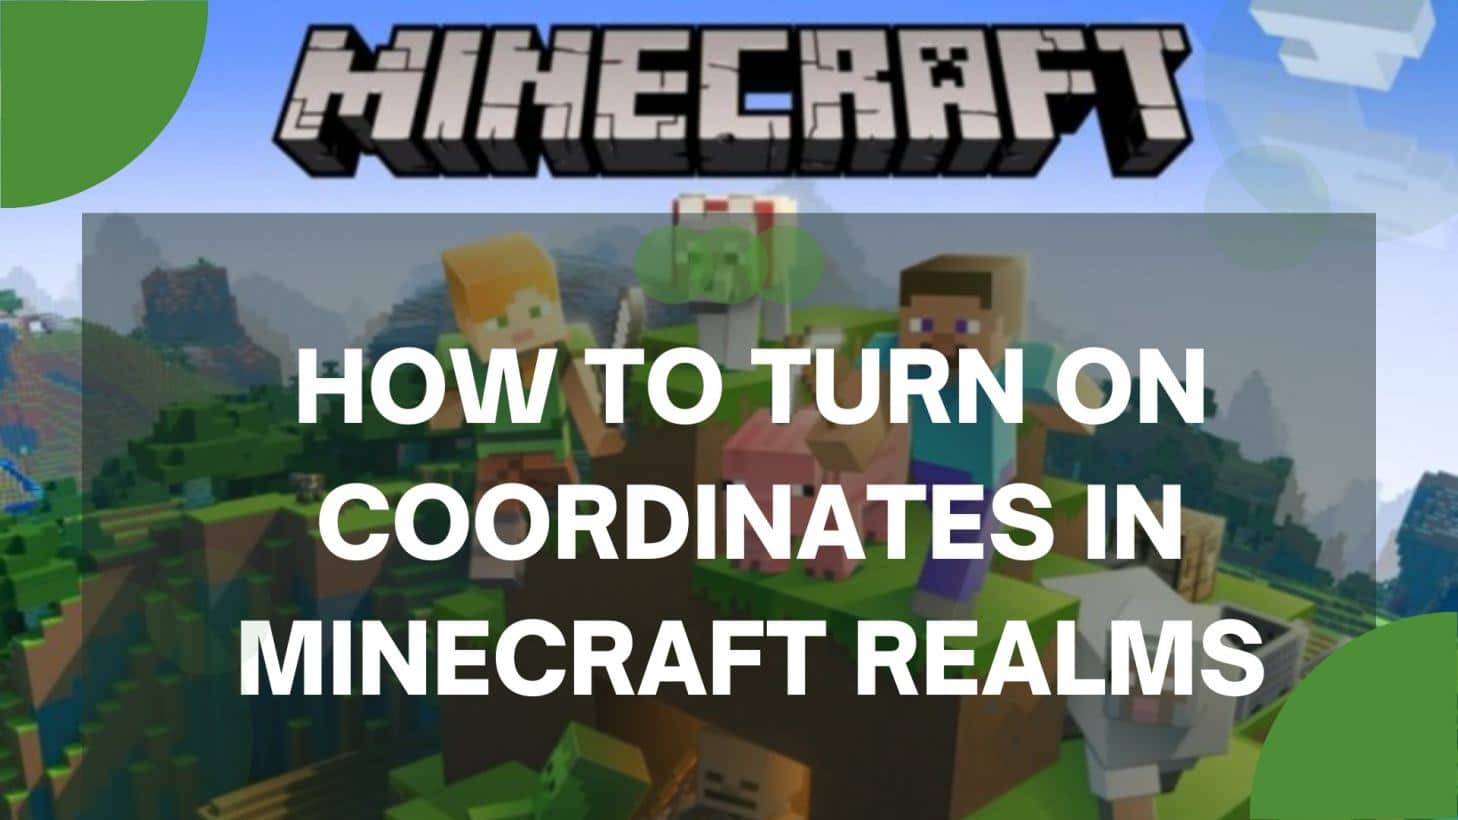 How to Turn on Coordinates in Minecraft Realms